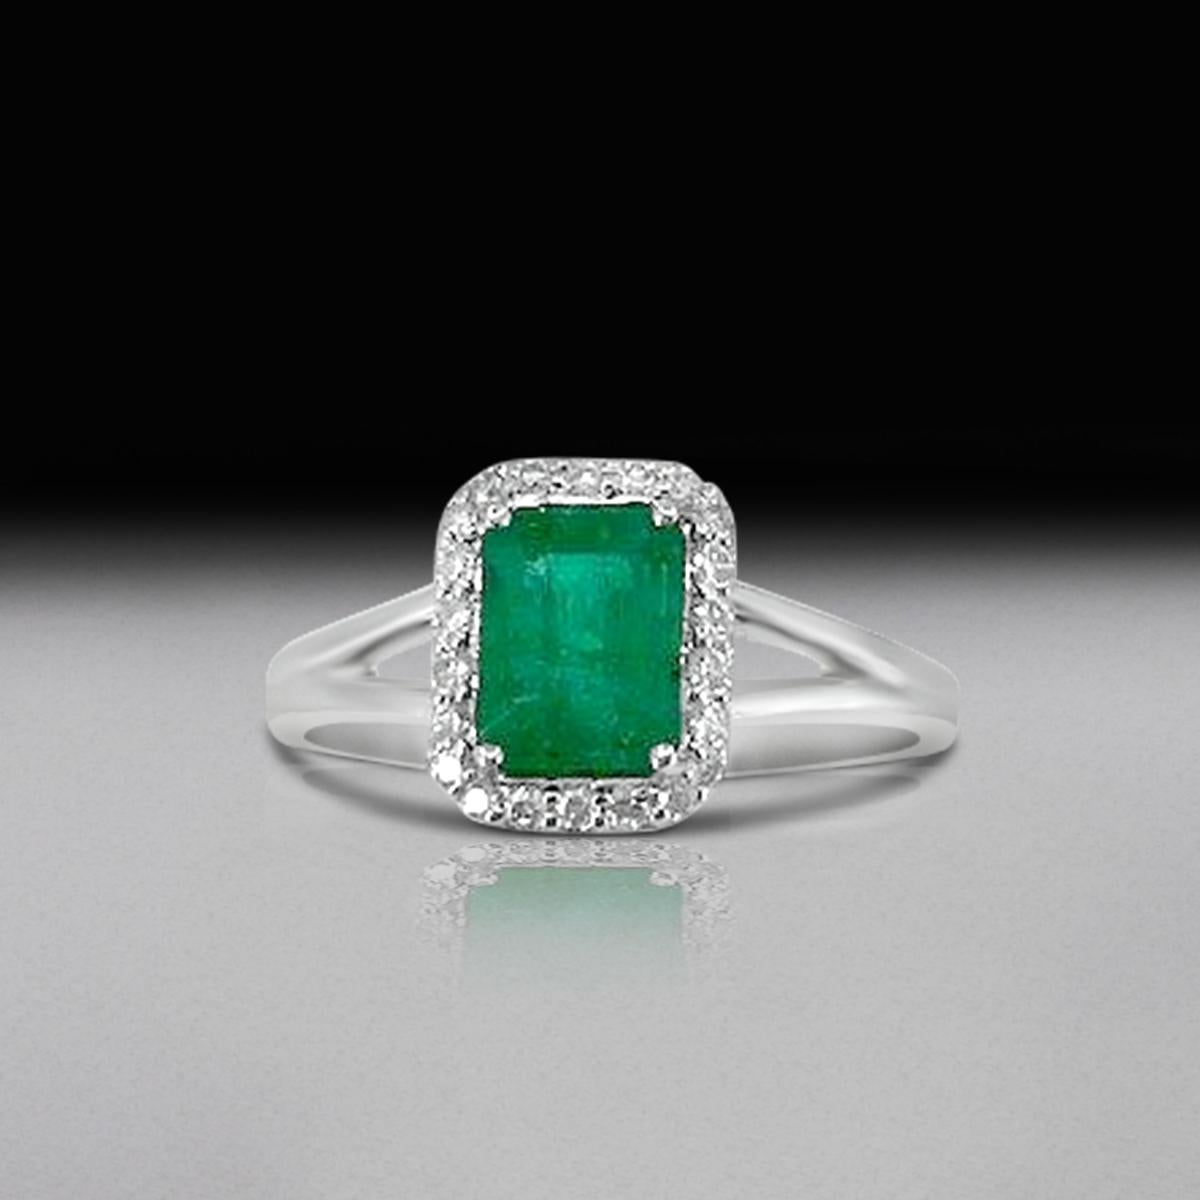 Octagon Cut 14K White Gold 0.96cts Emerald and Diamond Ring, Style# TS1117R